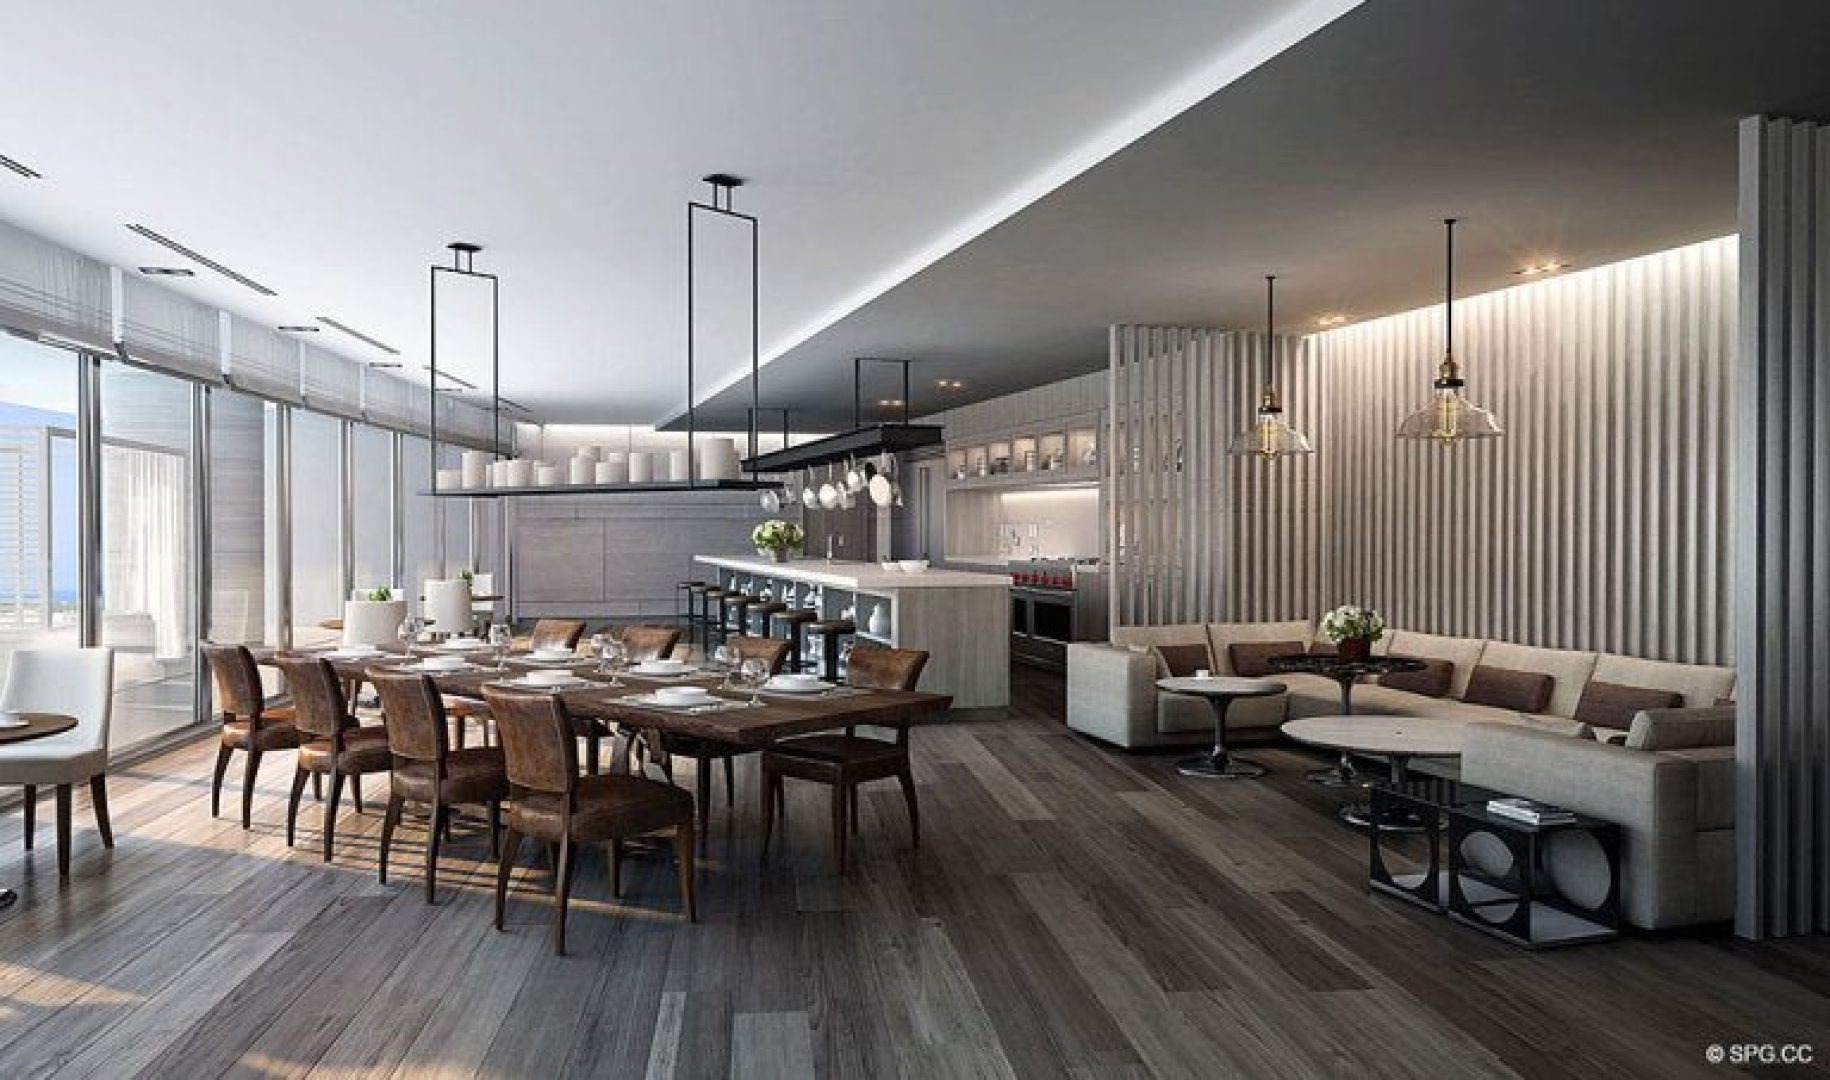 Culinary Club Room Concept for Riva, Luxury Waterfront Condos in Fort Lauderdale, Florida 33304.